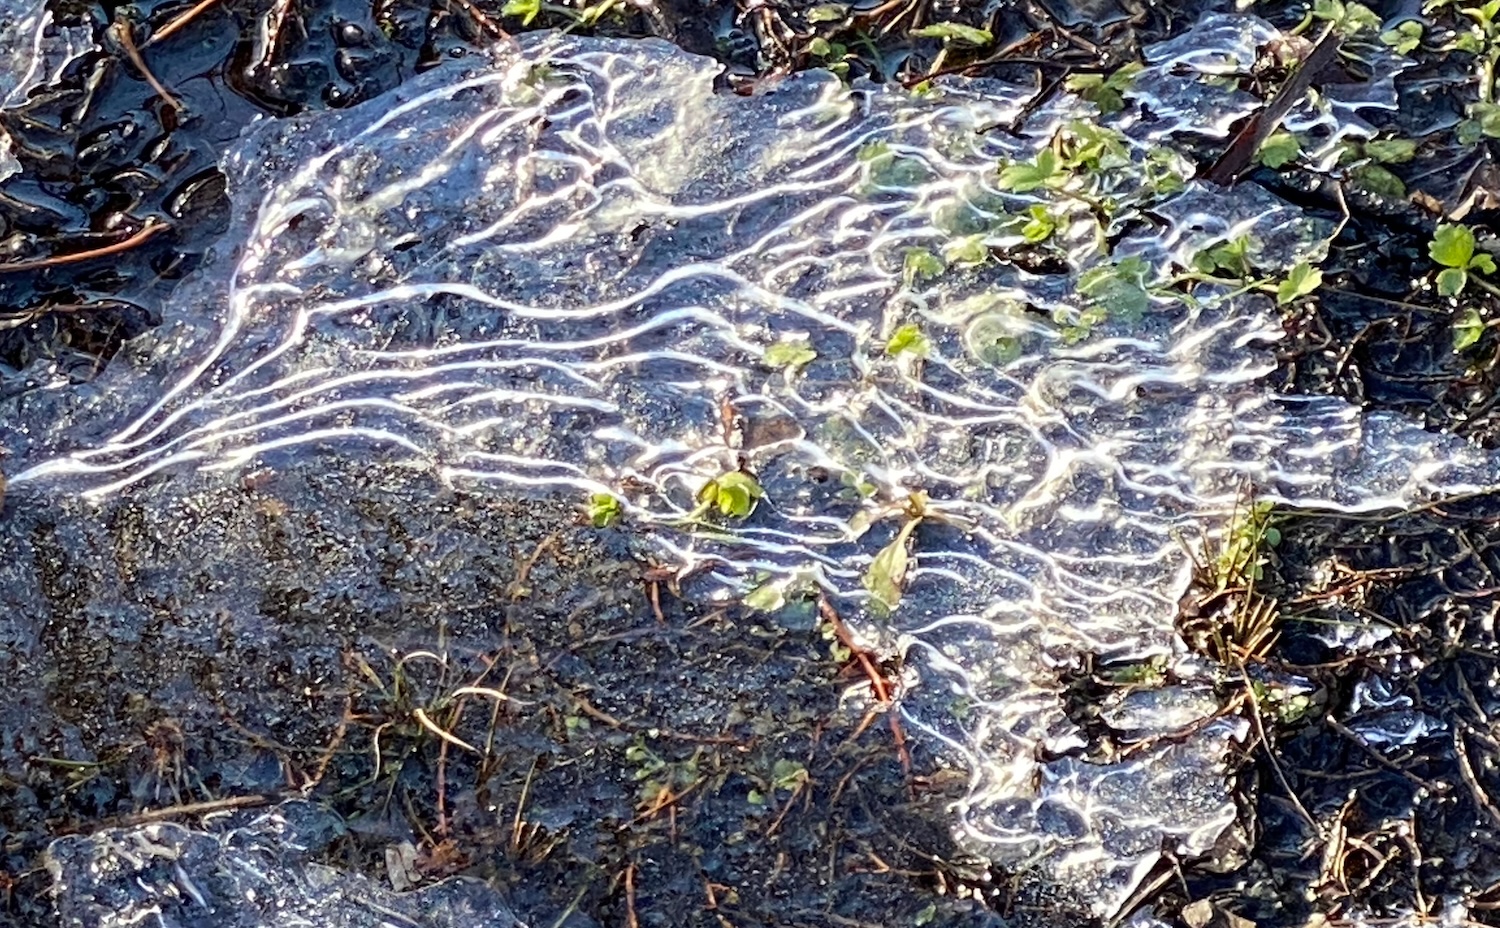 It's the weekend! Number 324, Patterns in Ice and Green Growth on the Ground